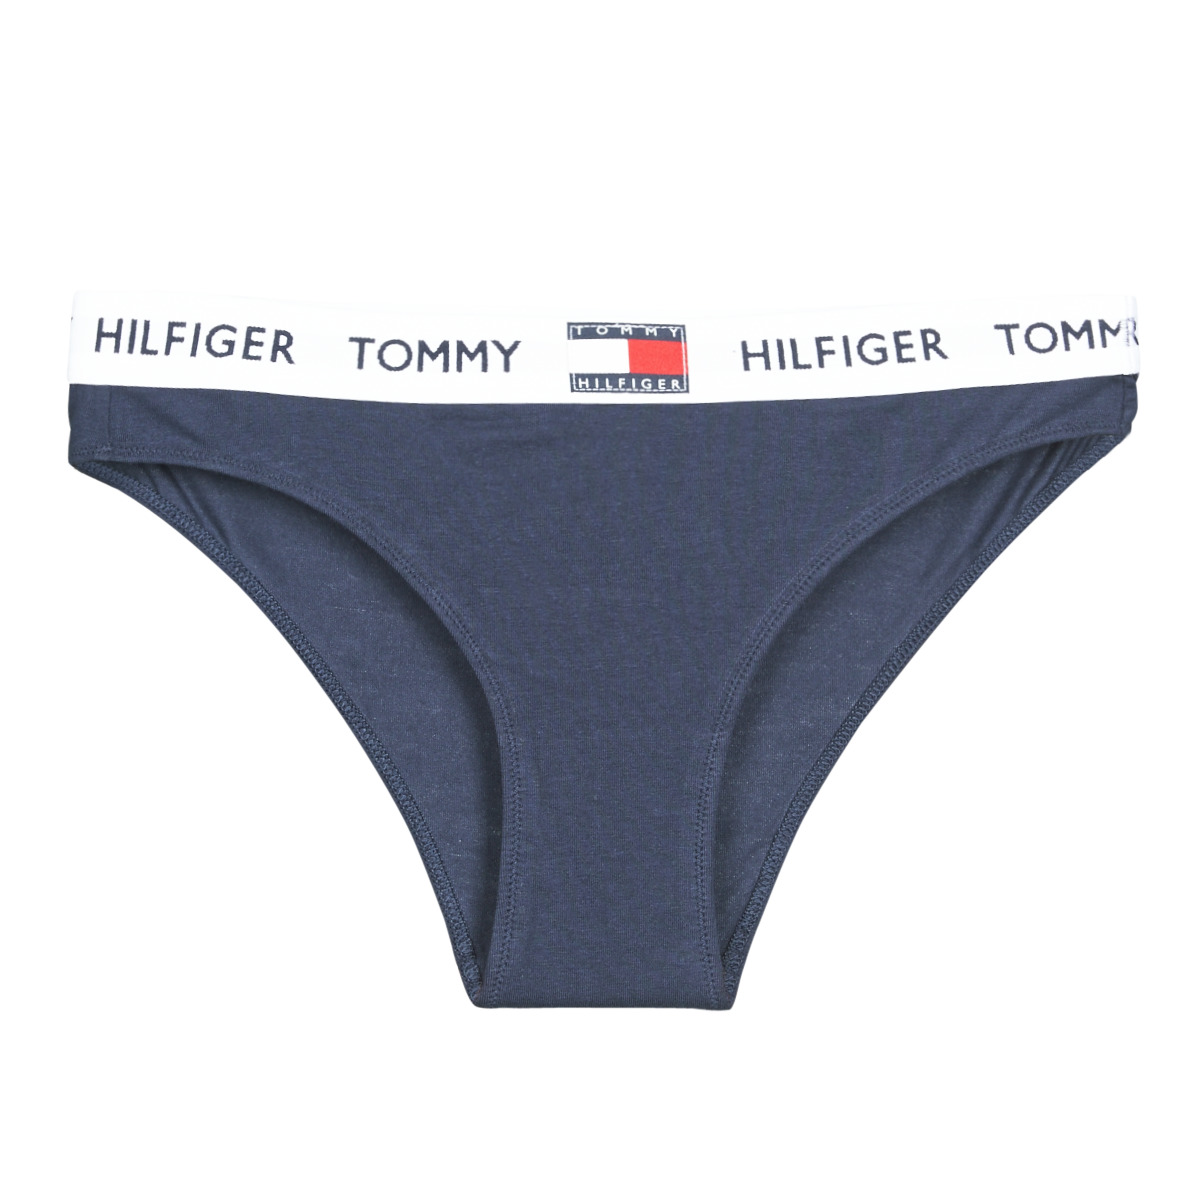 Tommy Hilfiger ORGANIC COTTON Marine - Fast delivery  Spartoo Europe ! -  Underwear Knickers/panties Women 24,00 €